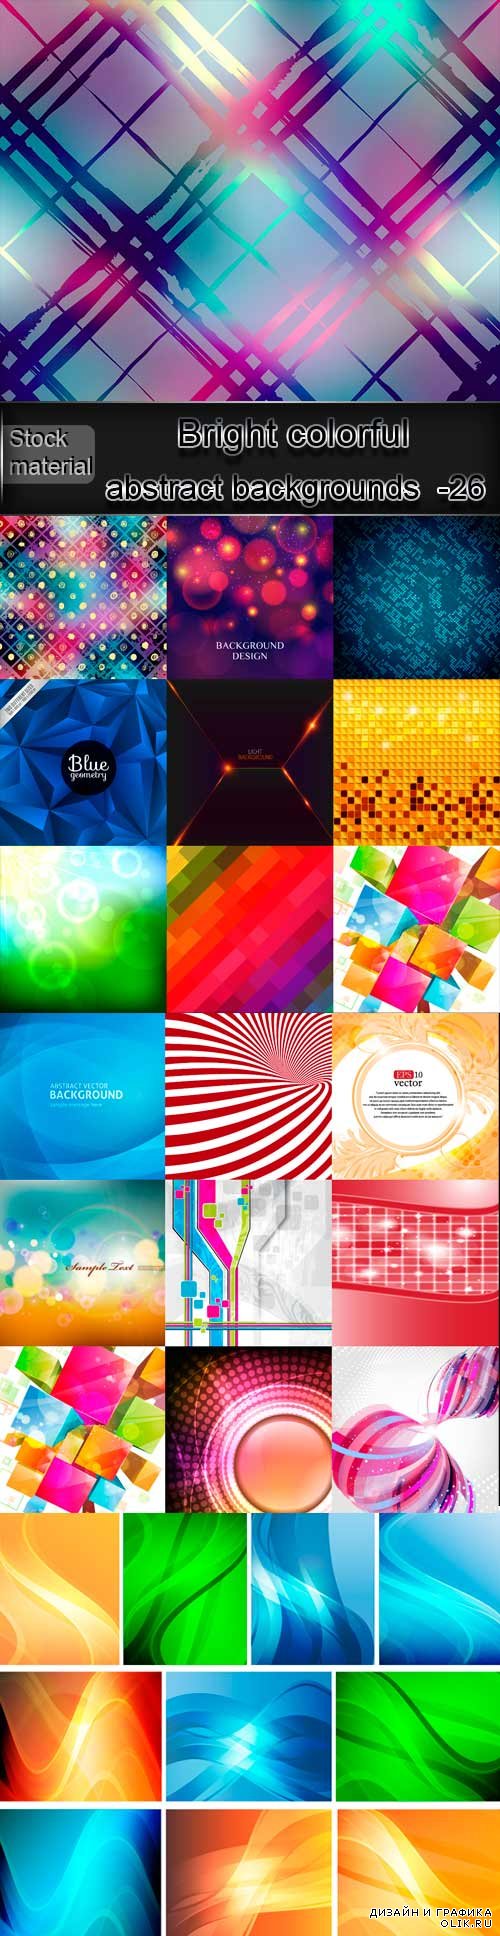 Bright colorful abstract backgrounds vector -26